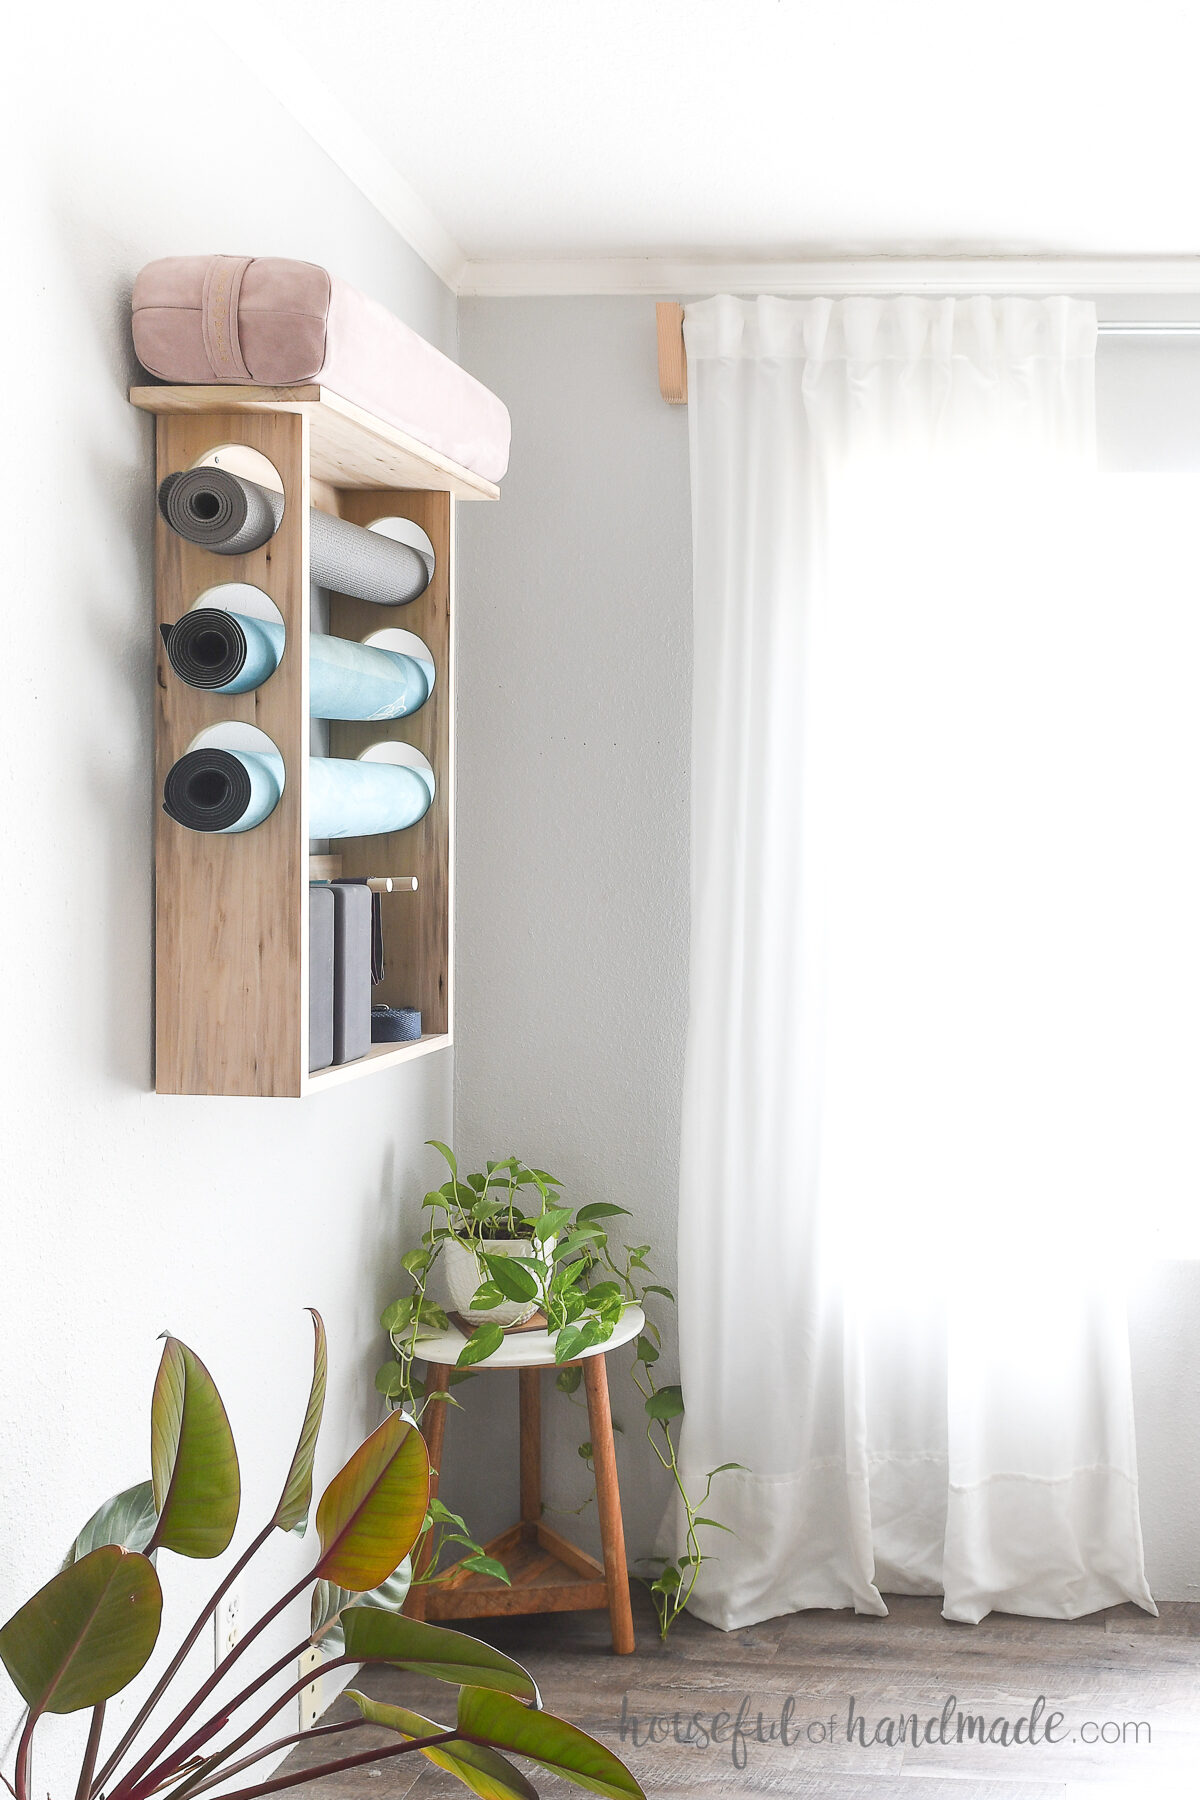 Wood DIY yoga mat holder on the wall with 3 yoga mats inside and plants on the floor by it. 